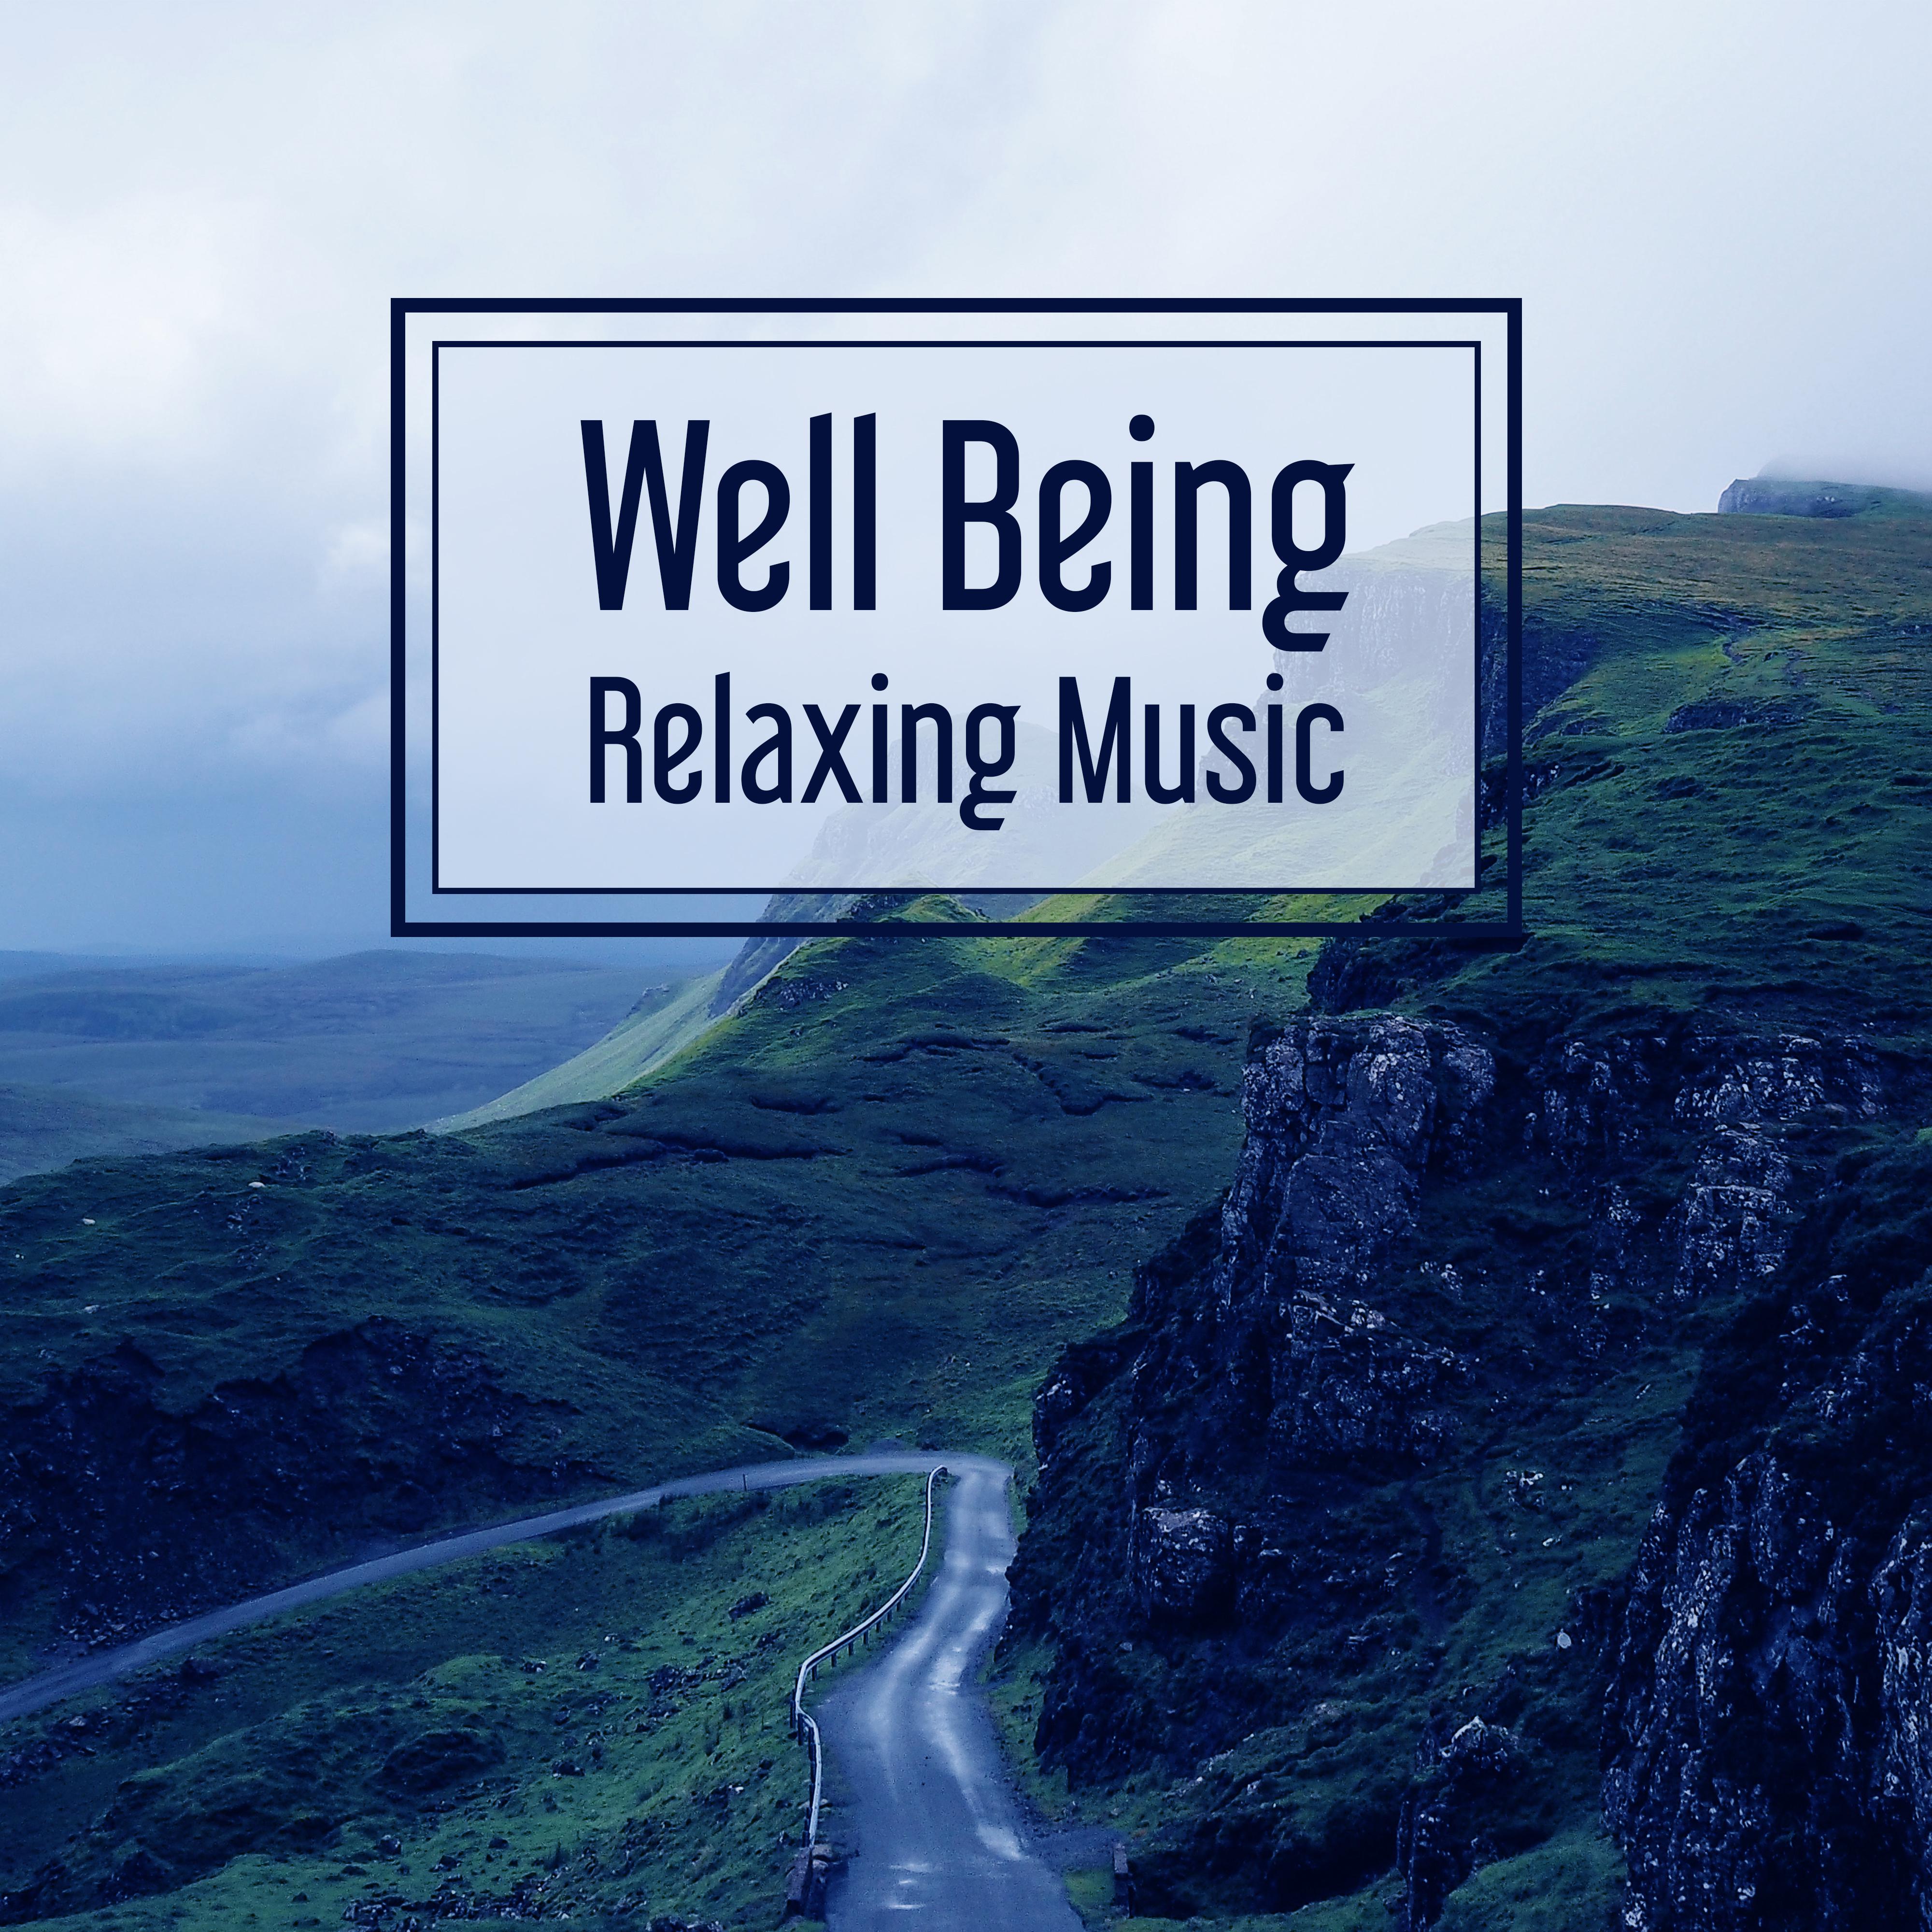 Well Being Relaxing Music  Peaceful Nature Sounds for Relax, Healing Music, Echoes of Nature, New Age, Reiki